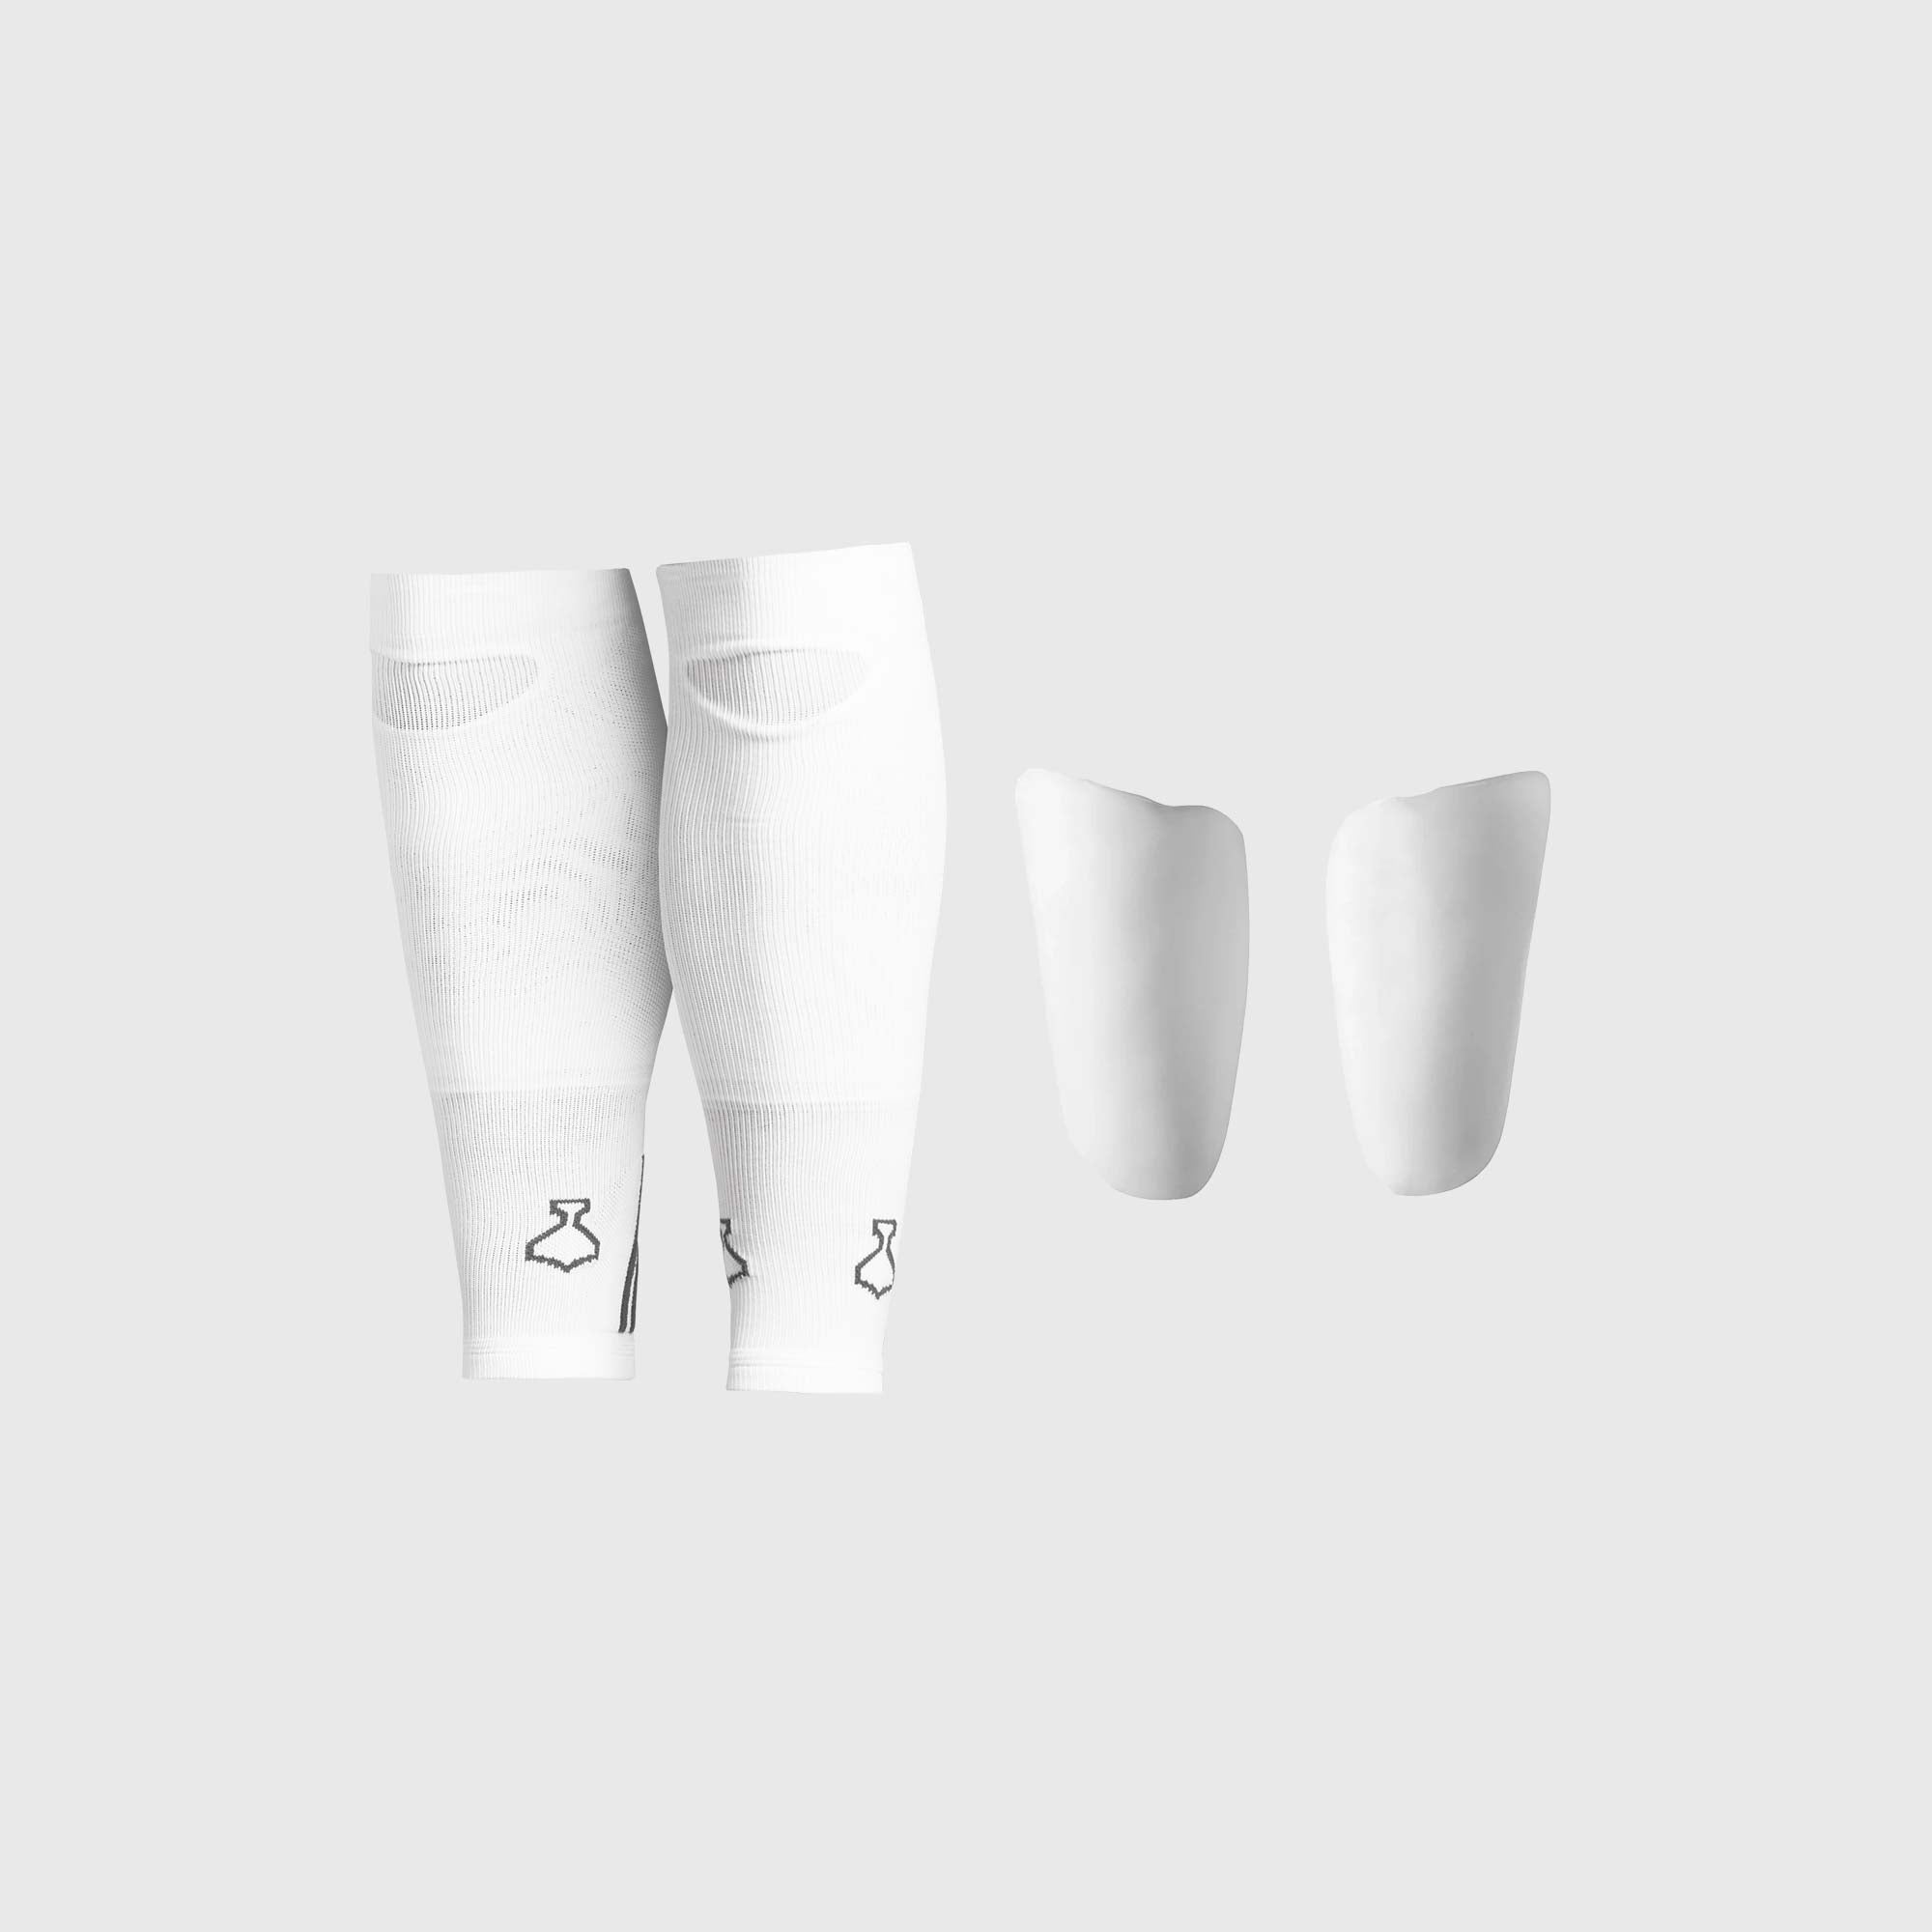 Women's compression calf sleeves for athletes